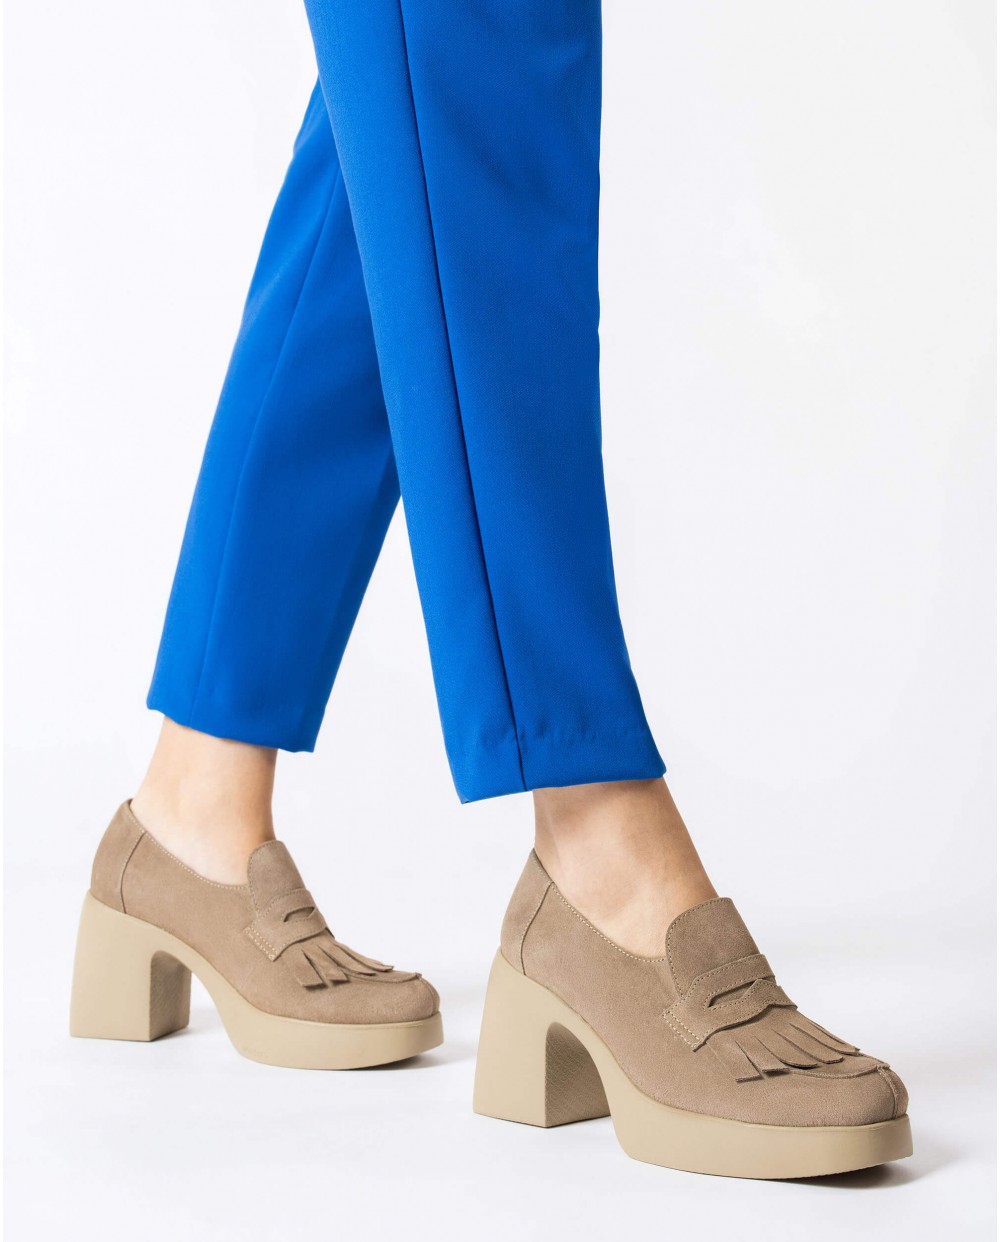 Wonders-Wedges-Taupe Buzz Suede Mary Jane